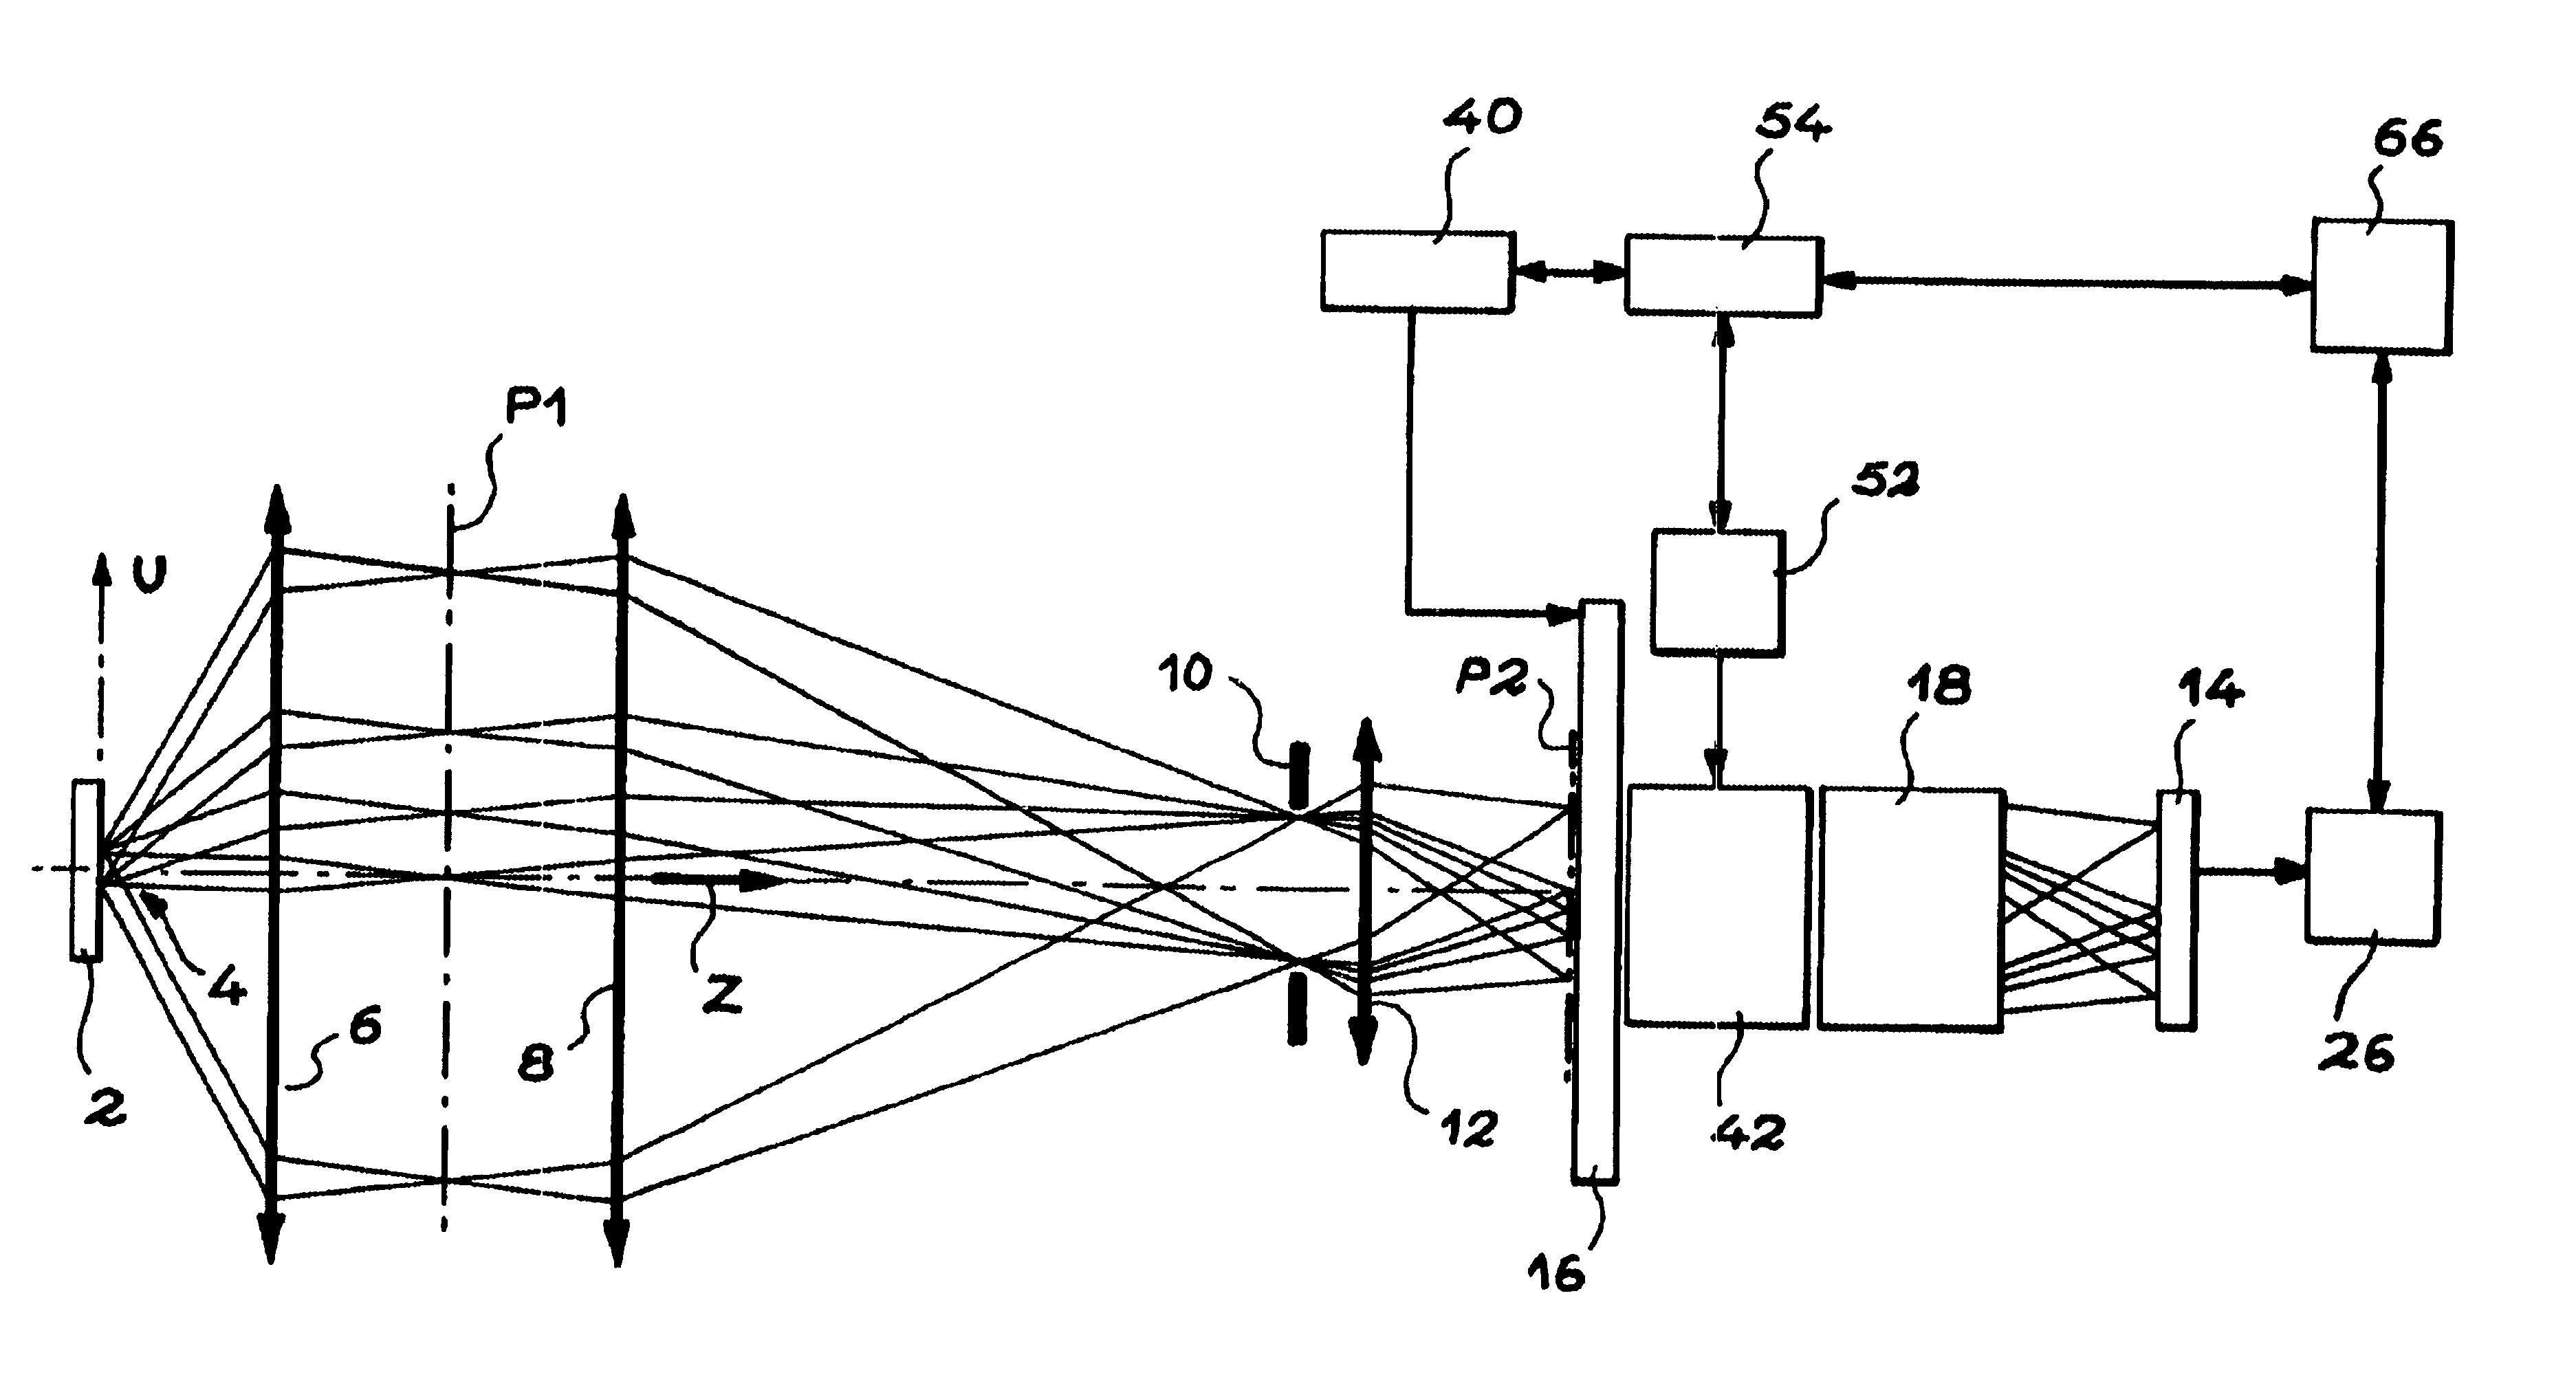 Device for measuring spatial distribution of the spectral emission of an object